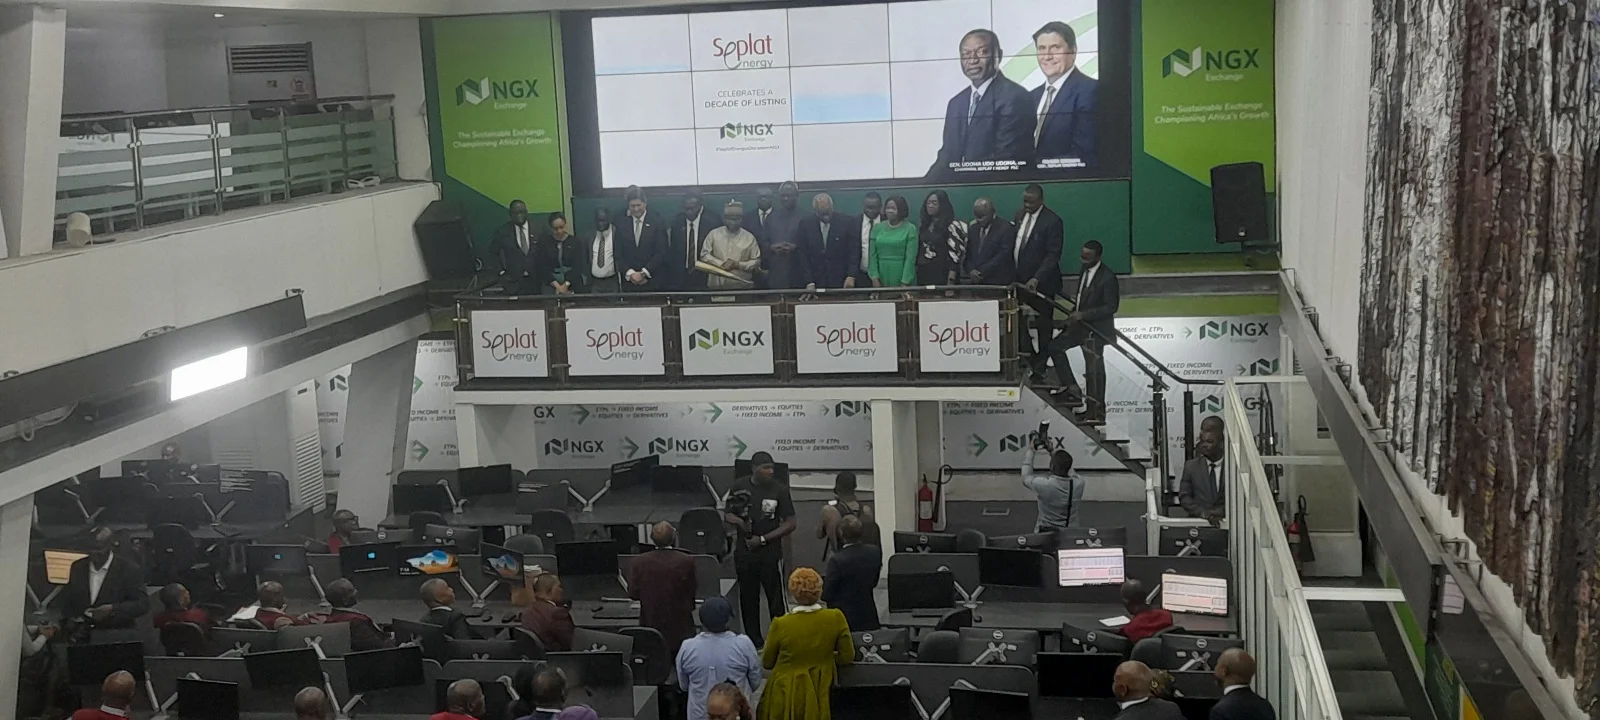 Seplat Energy pays $2bn Tax to FG since listing on the NGX in 2014